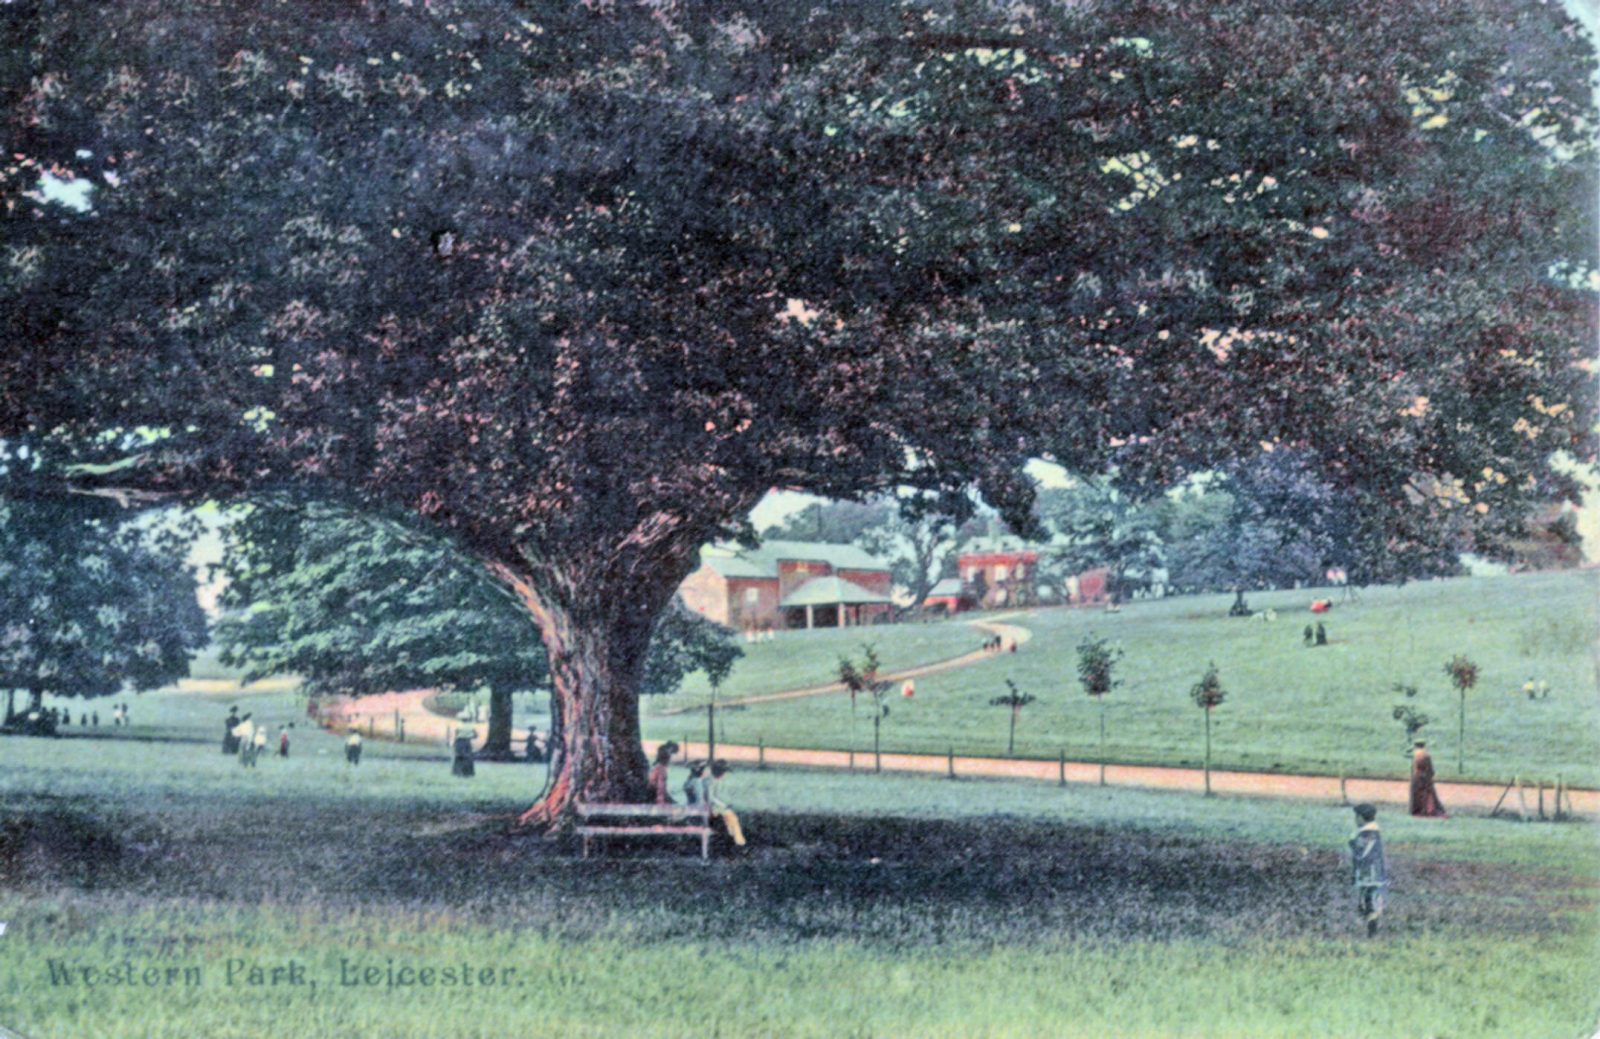 Western Park, Leicester. 1901-1920: Western Park with Hall in background. Posted 1904-10 (File:1226)